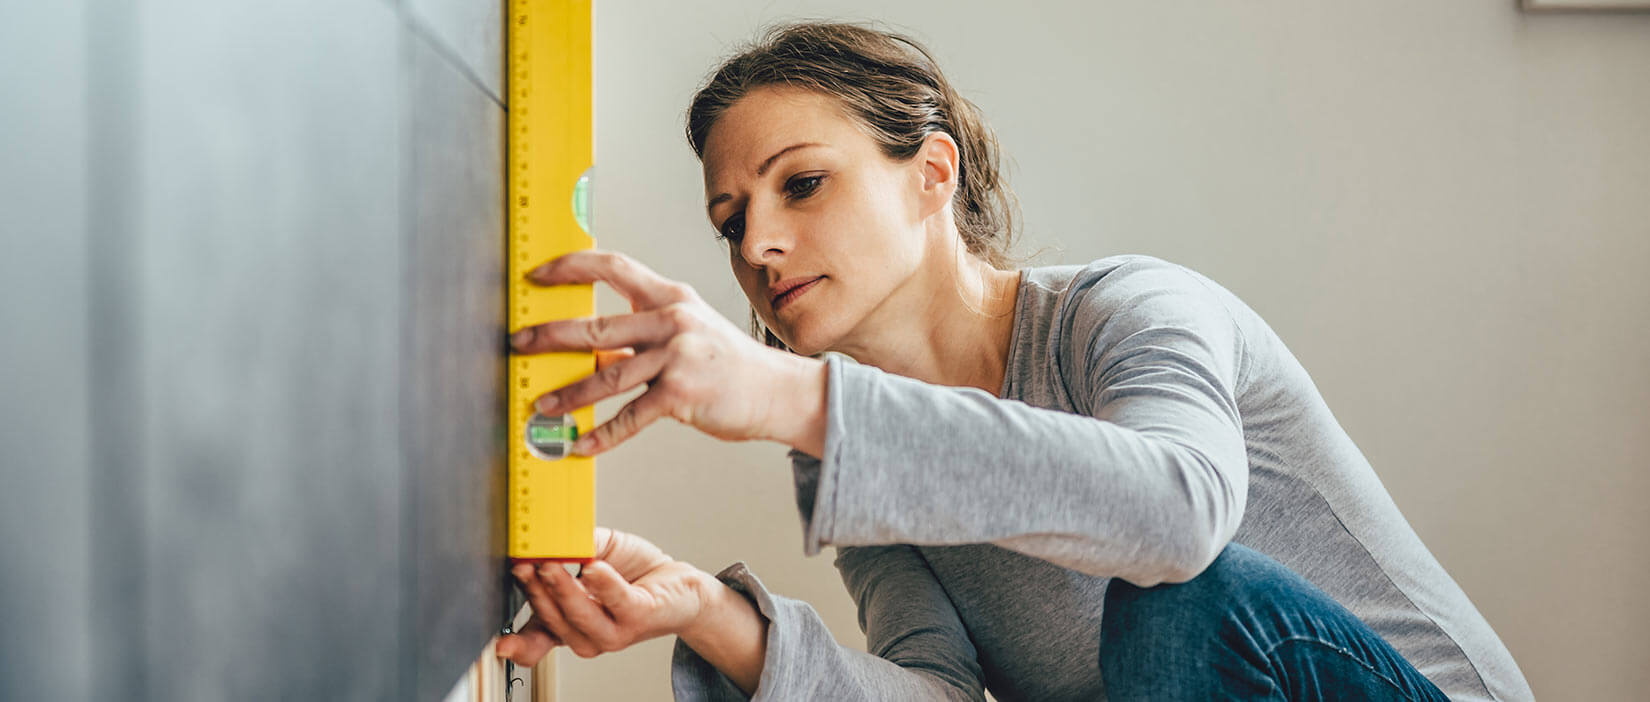 Woman in gray long sleeve shirt using yellow level to measure wall.